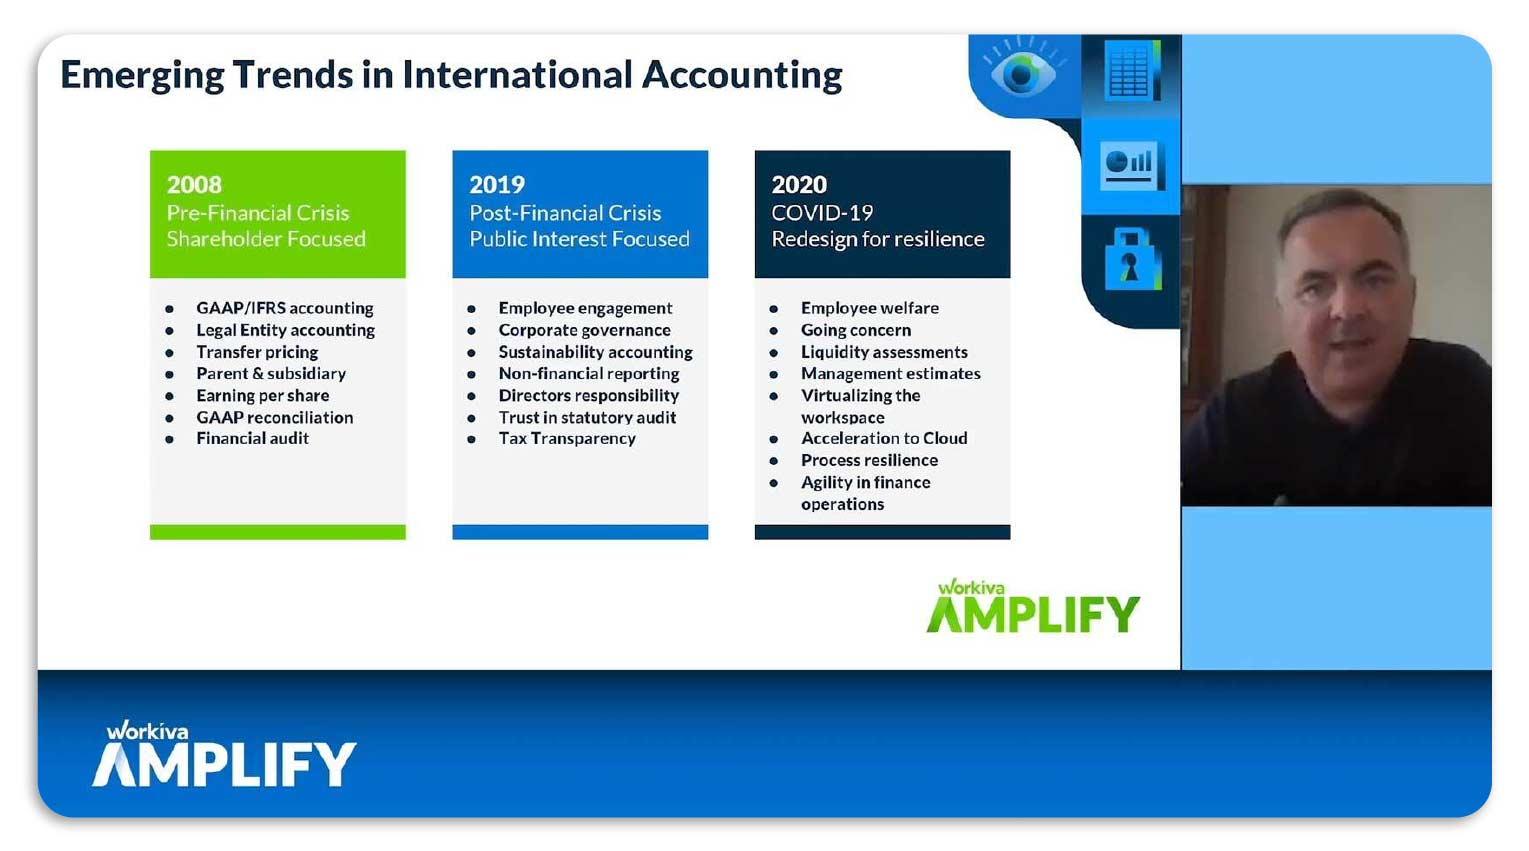 List of emerging trends in international accounting